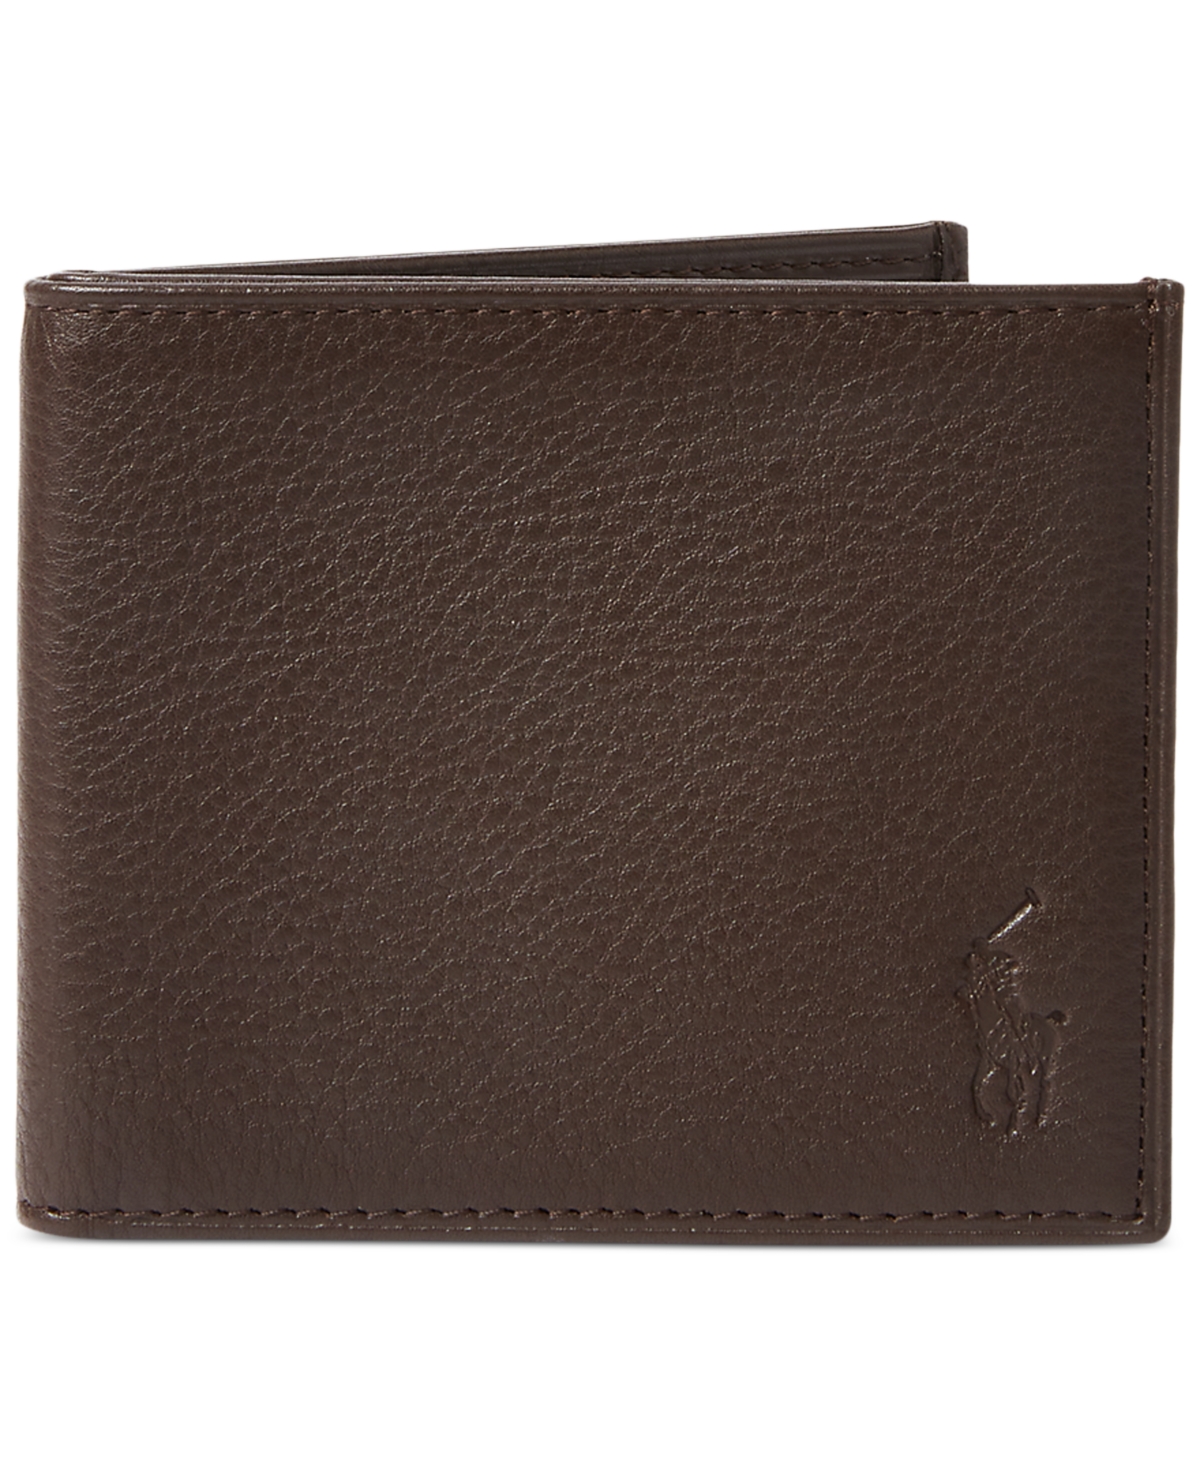 Polo Ralph Lauren Pebbled Leather Billfold In Brown